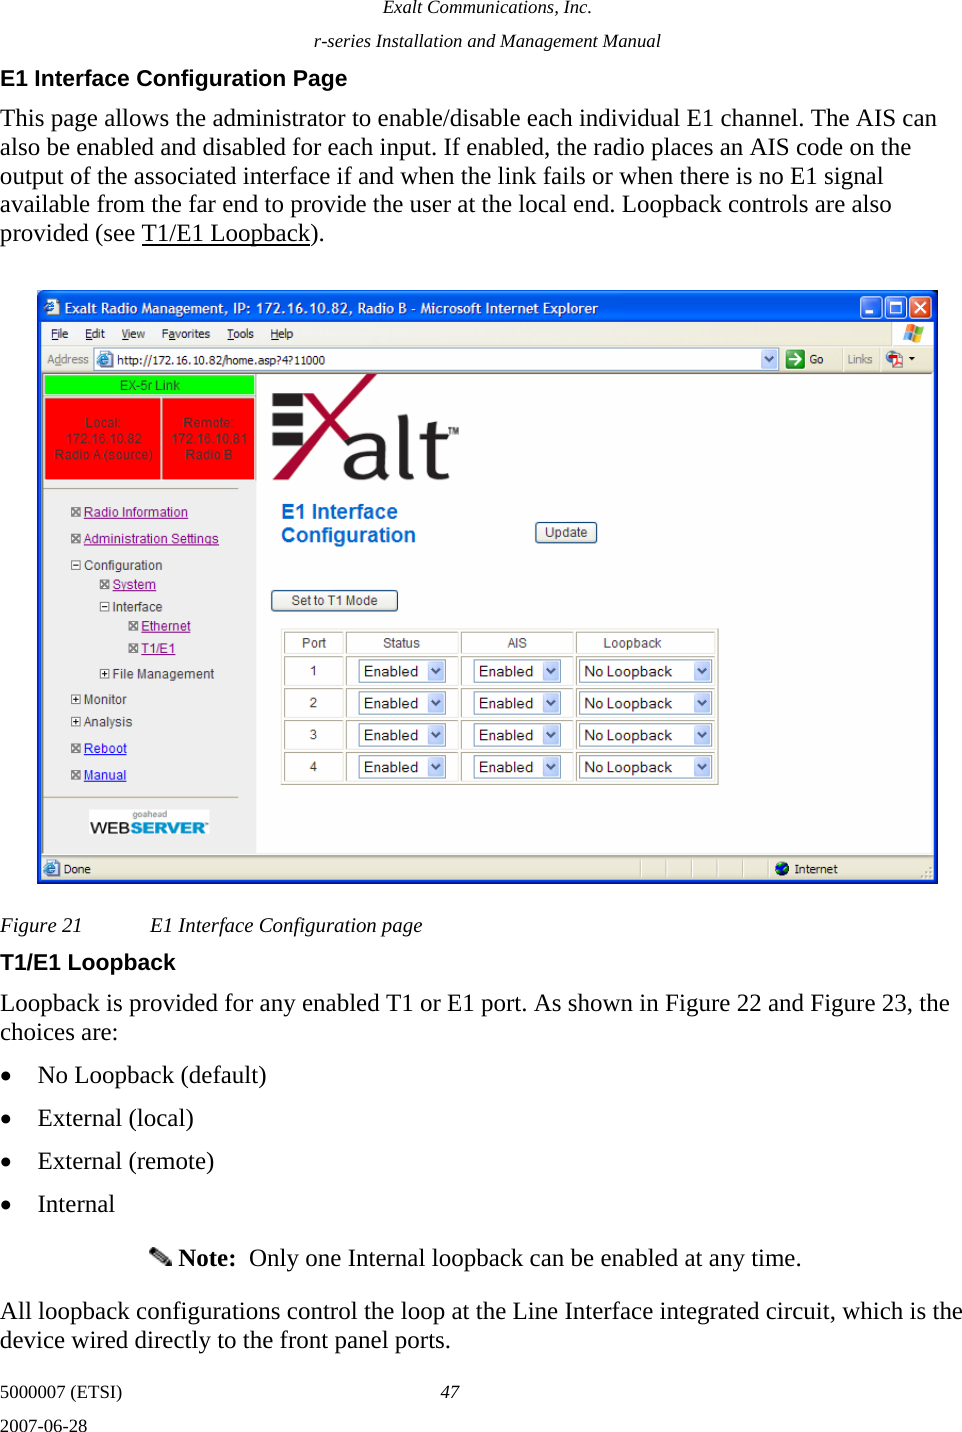 Exalt Communications, Inc. r-series Installation and Management Manual 5000007 (ETSI)  47 2007-06-28  E1 Interface Configuration Page This page allows the administrator to enable/disable each individual E1 channel. The AIS can also be enabled and disabled for each input. If enabled, the radio places an AIS code on the output of the associated interface if and when the link fails or when there is no E1 signal available from the far end to provide the user at the local end. Loopback controls are also provided (see T1/E1 Loopback). Figure 21  E1 Interface Configuration page T1/E1 Loopback Loopback is provided for any enabled T1 or E1 port. As shown in Figure 22 and Figure 23, the choices are: • No Loopback (default) • External (local) • External (remote) • Internal  Note:  Only one Internal loopback can be enabled at any time. All loopback configurations control the loop at the Line Interface integrated circuit, which is the device wired directly to the front panel ports. 